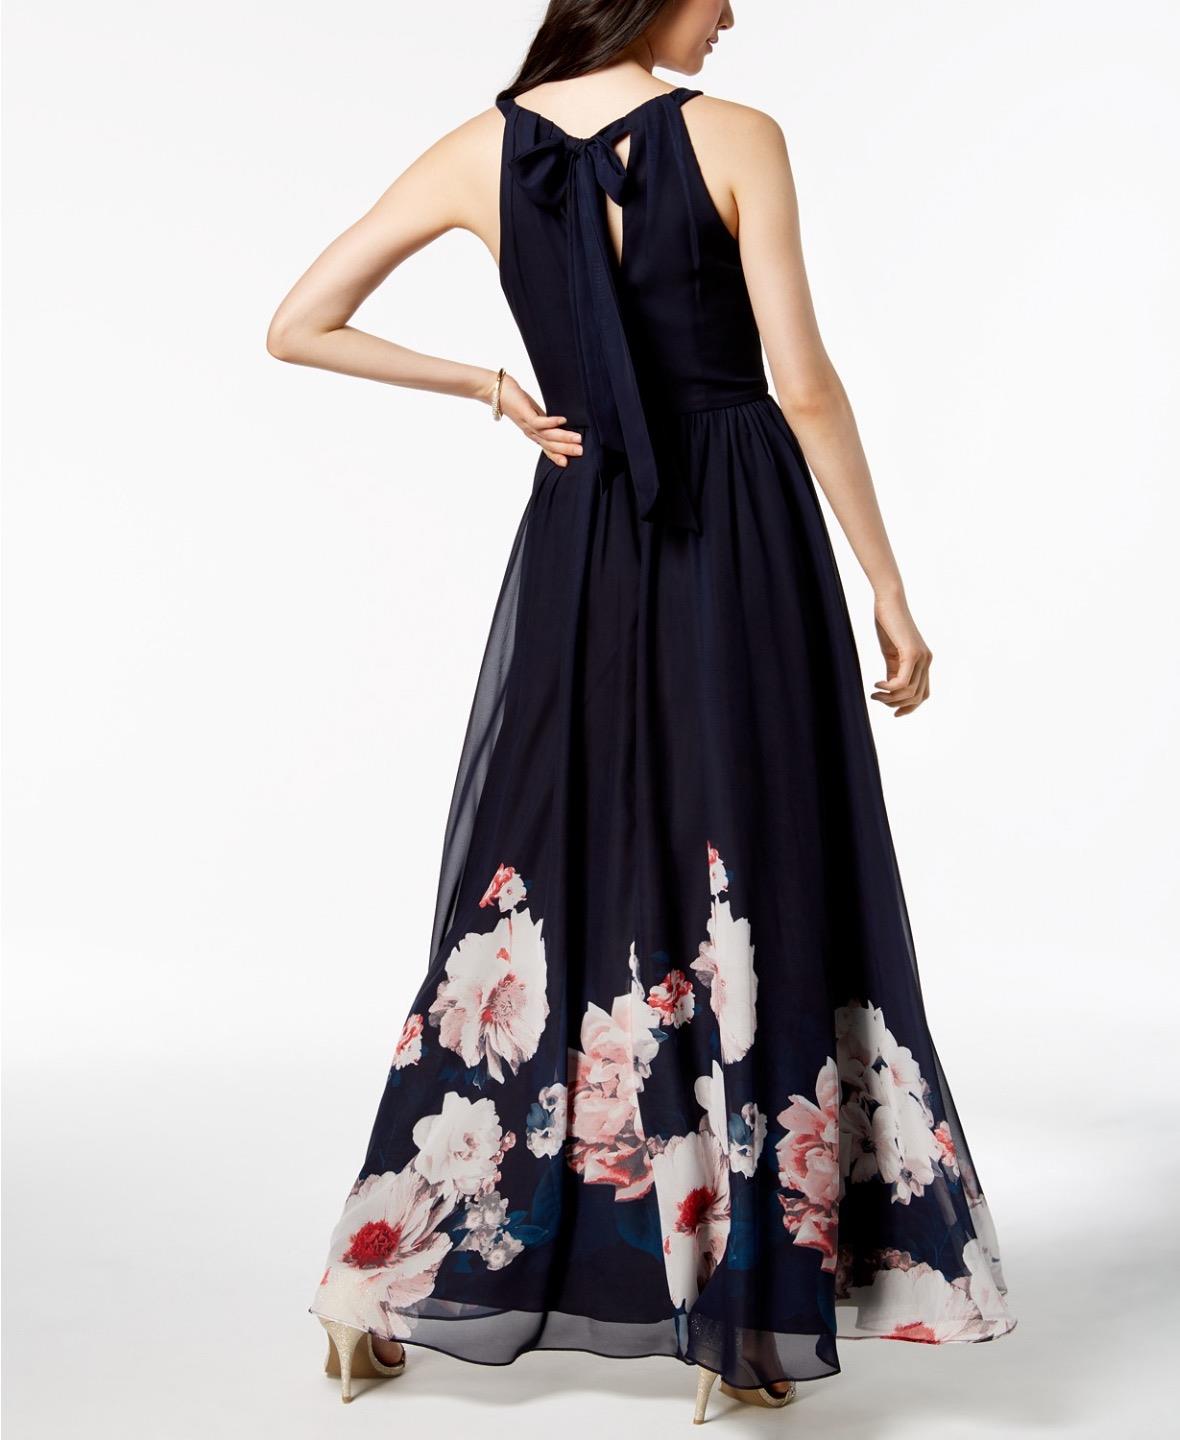 Betsy & Adam Floral Printed Navy Blue Chiffon Halter Long Gown Dress 4